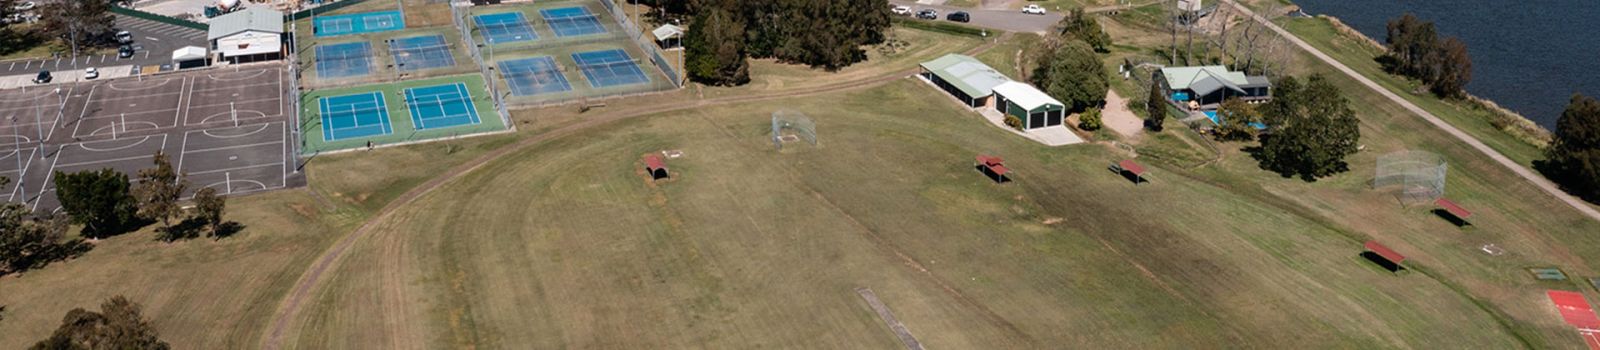 Aerial view of Raymond Terrace sports facilities including soccer fields and netball courts banner image